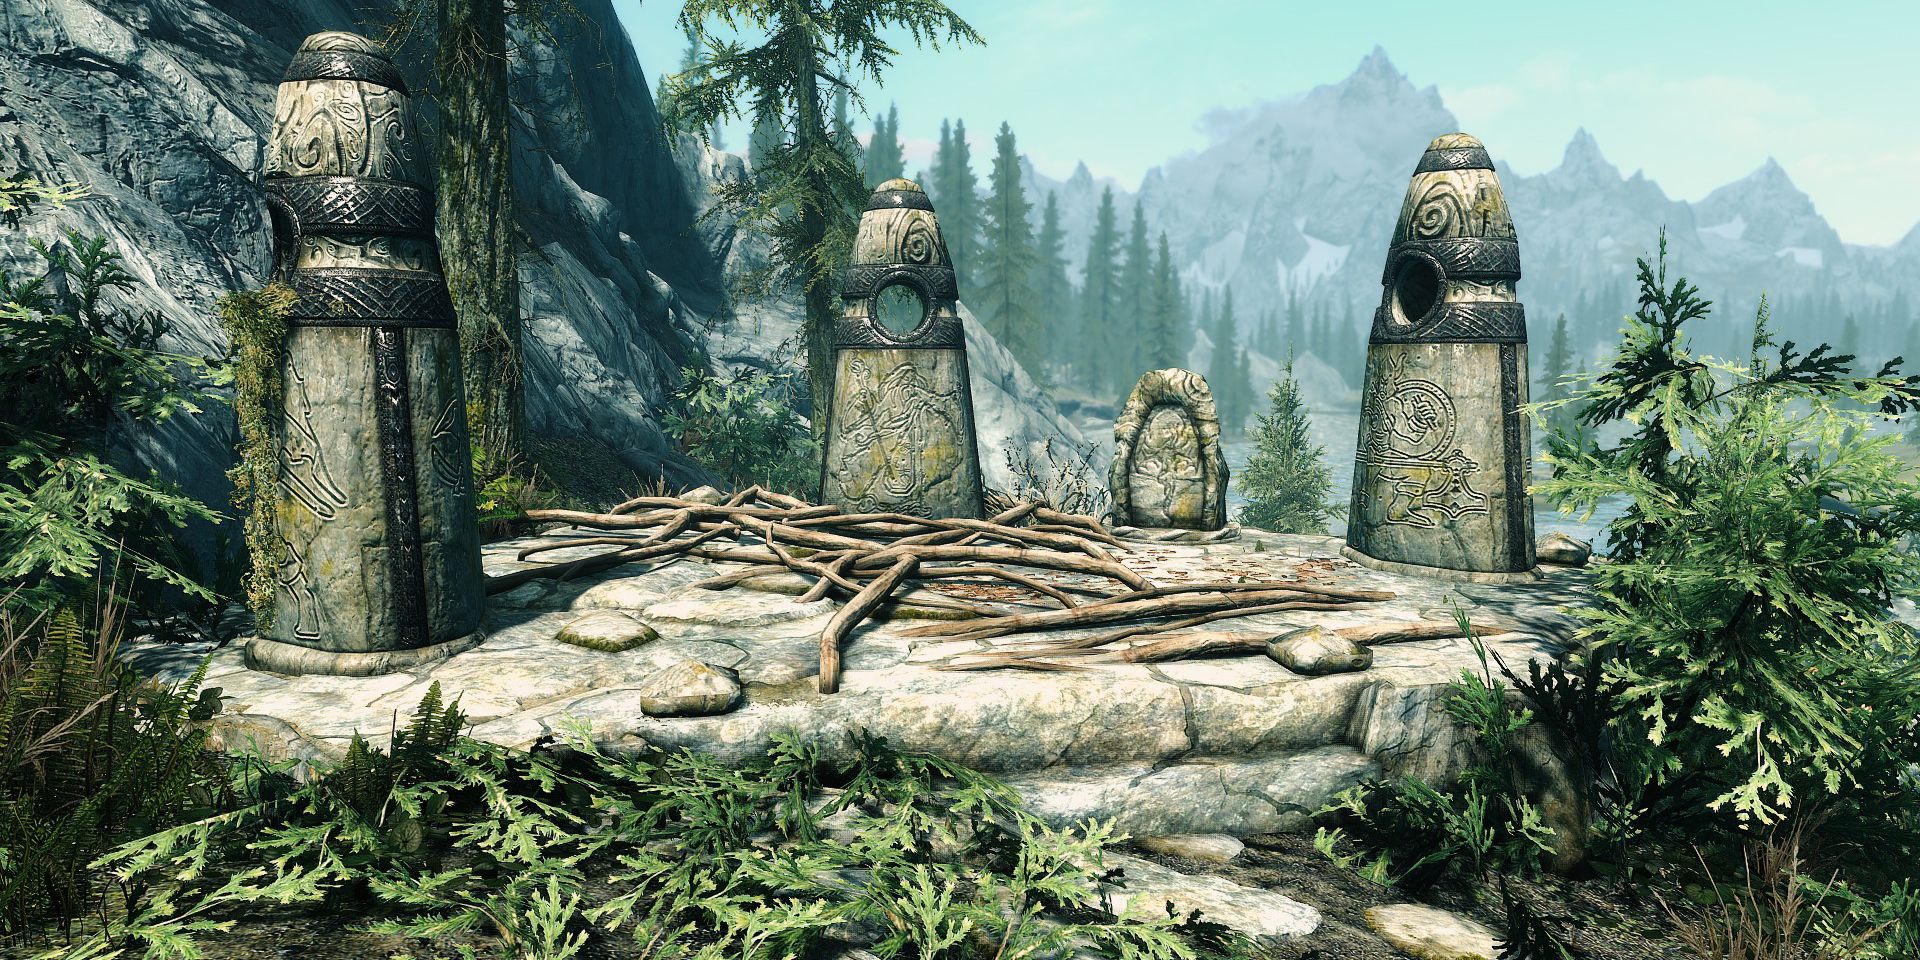 The Standing Stone or Guardian Stones in Skyrim